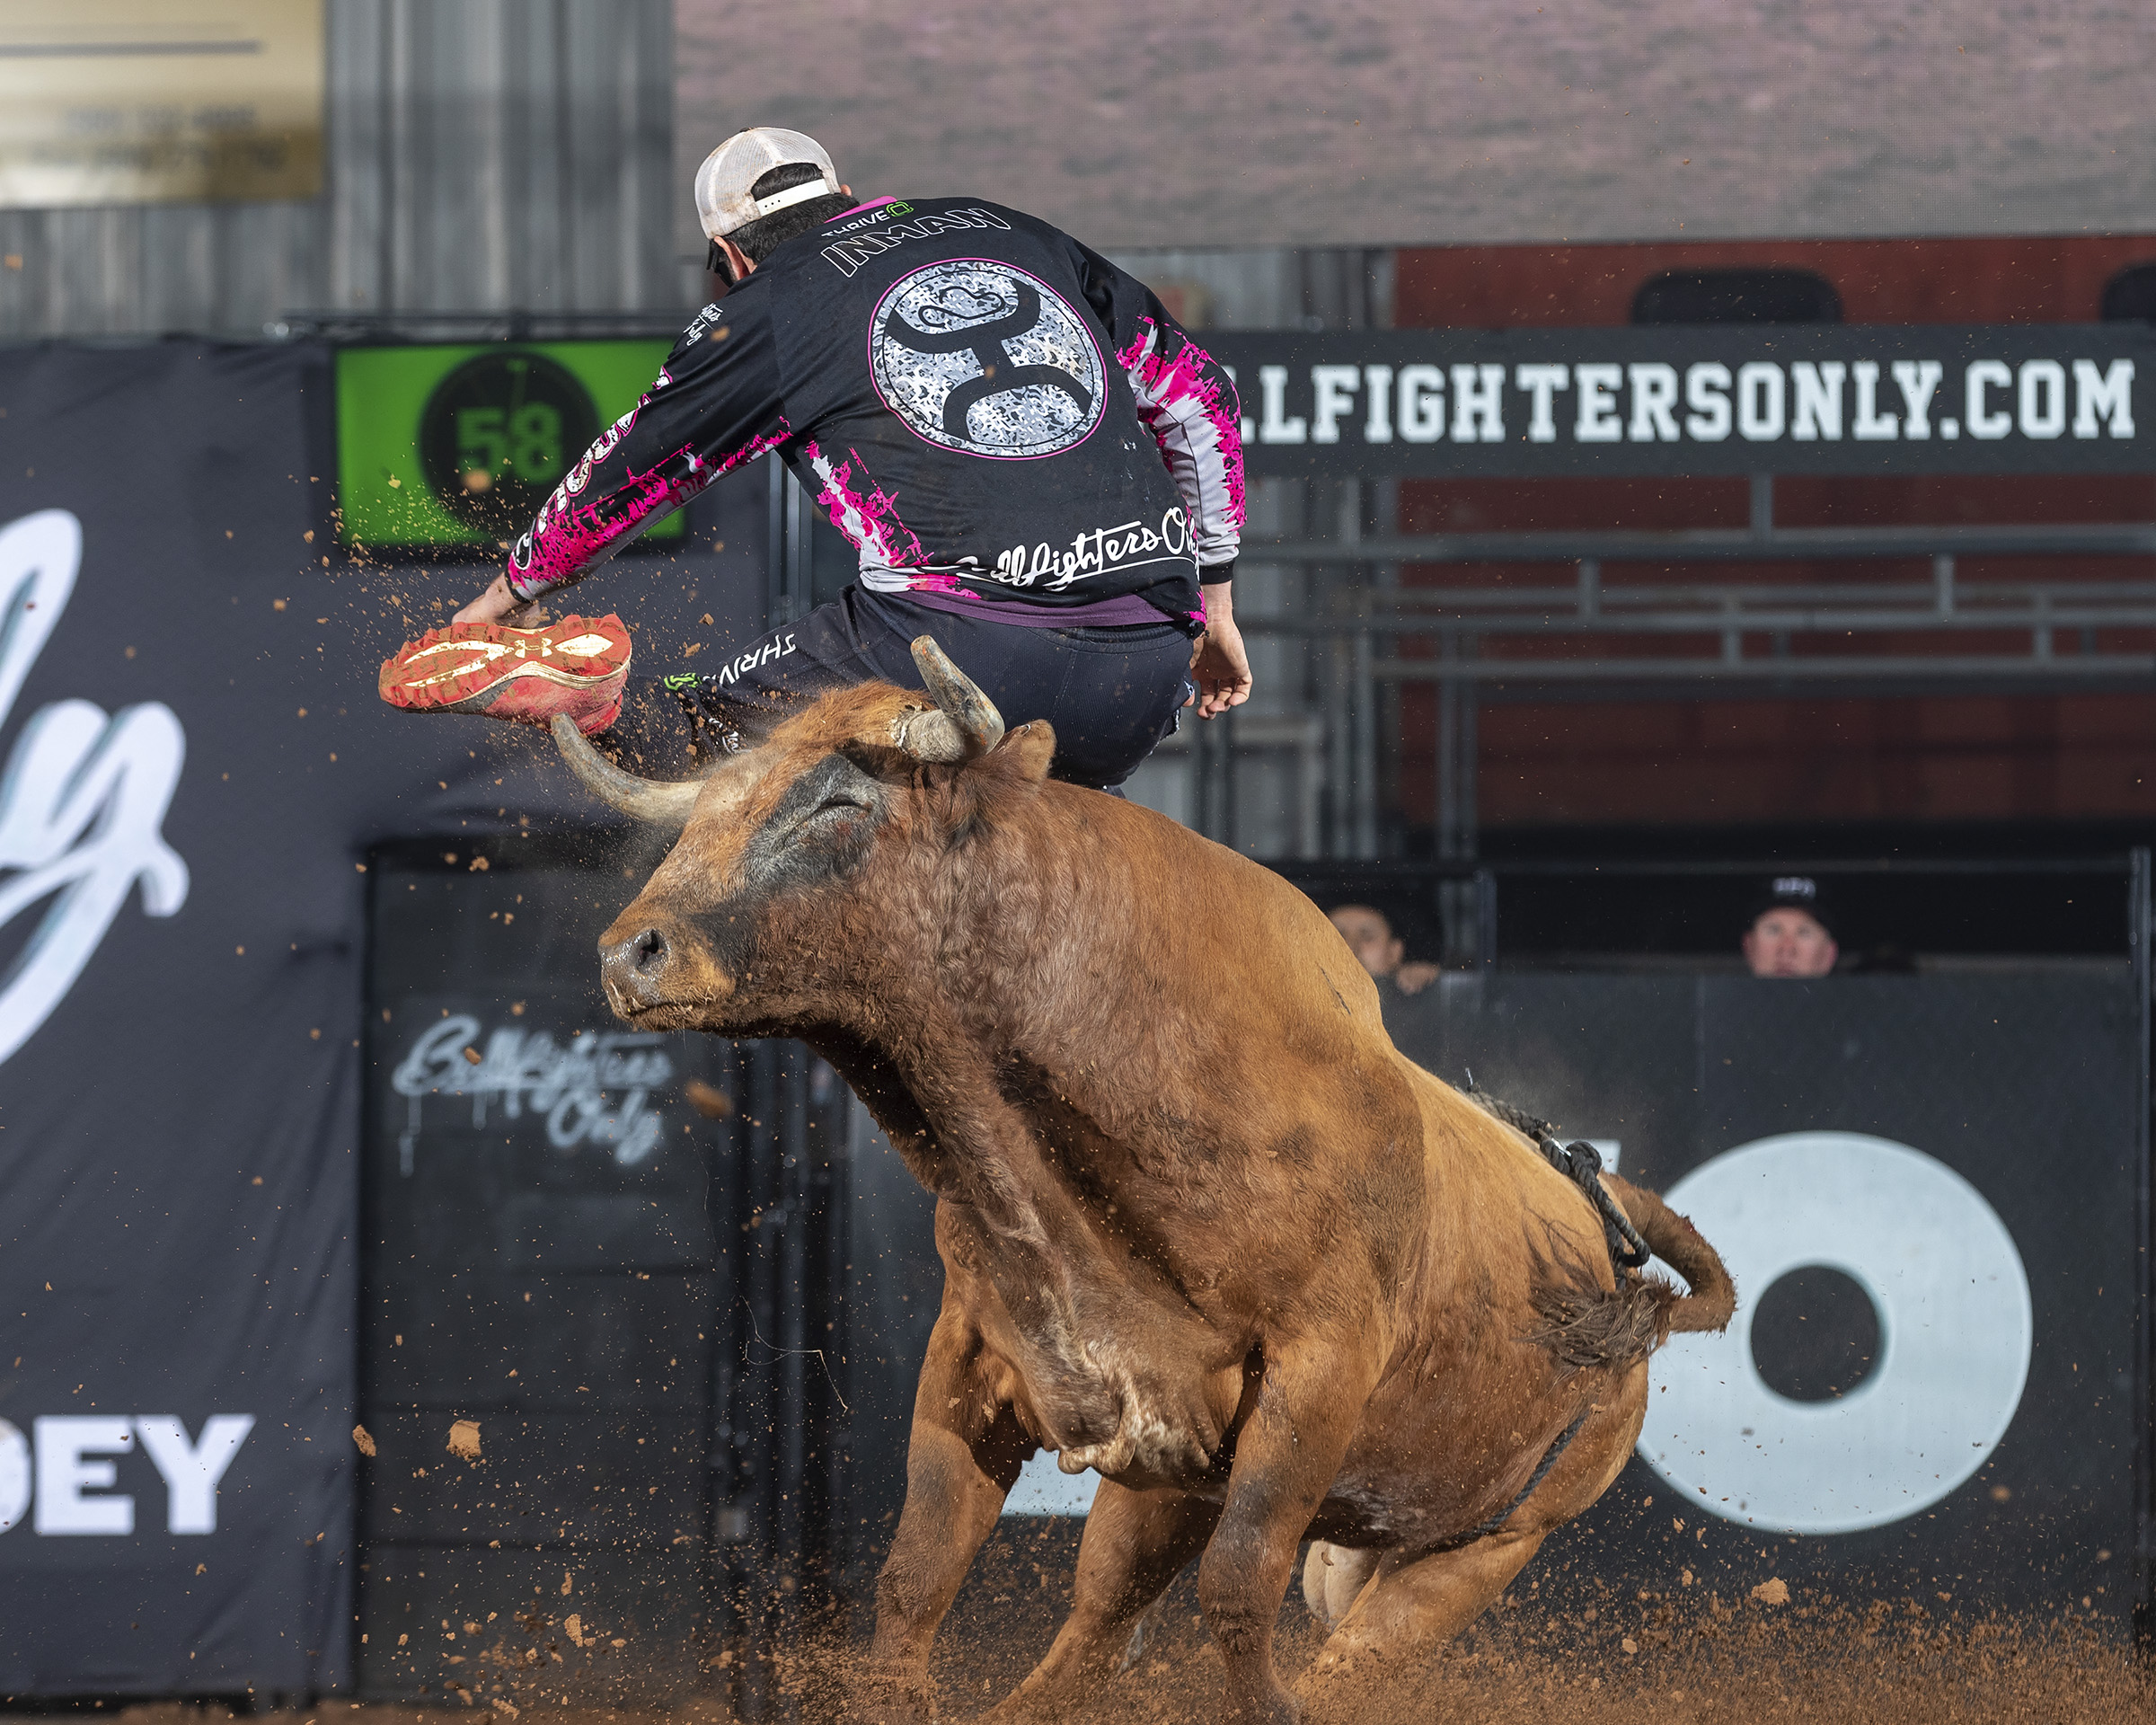 Toby Inman leaps over his bull during his Hooey Championship Round bout, where the Illinois man scored 87 points to win the Bullfighters Only Ada Invitational. (PHOTO BY TODD BREWER)